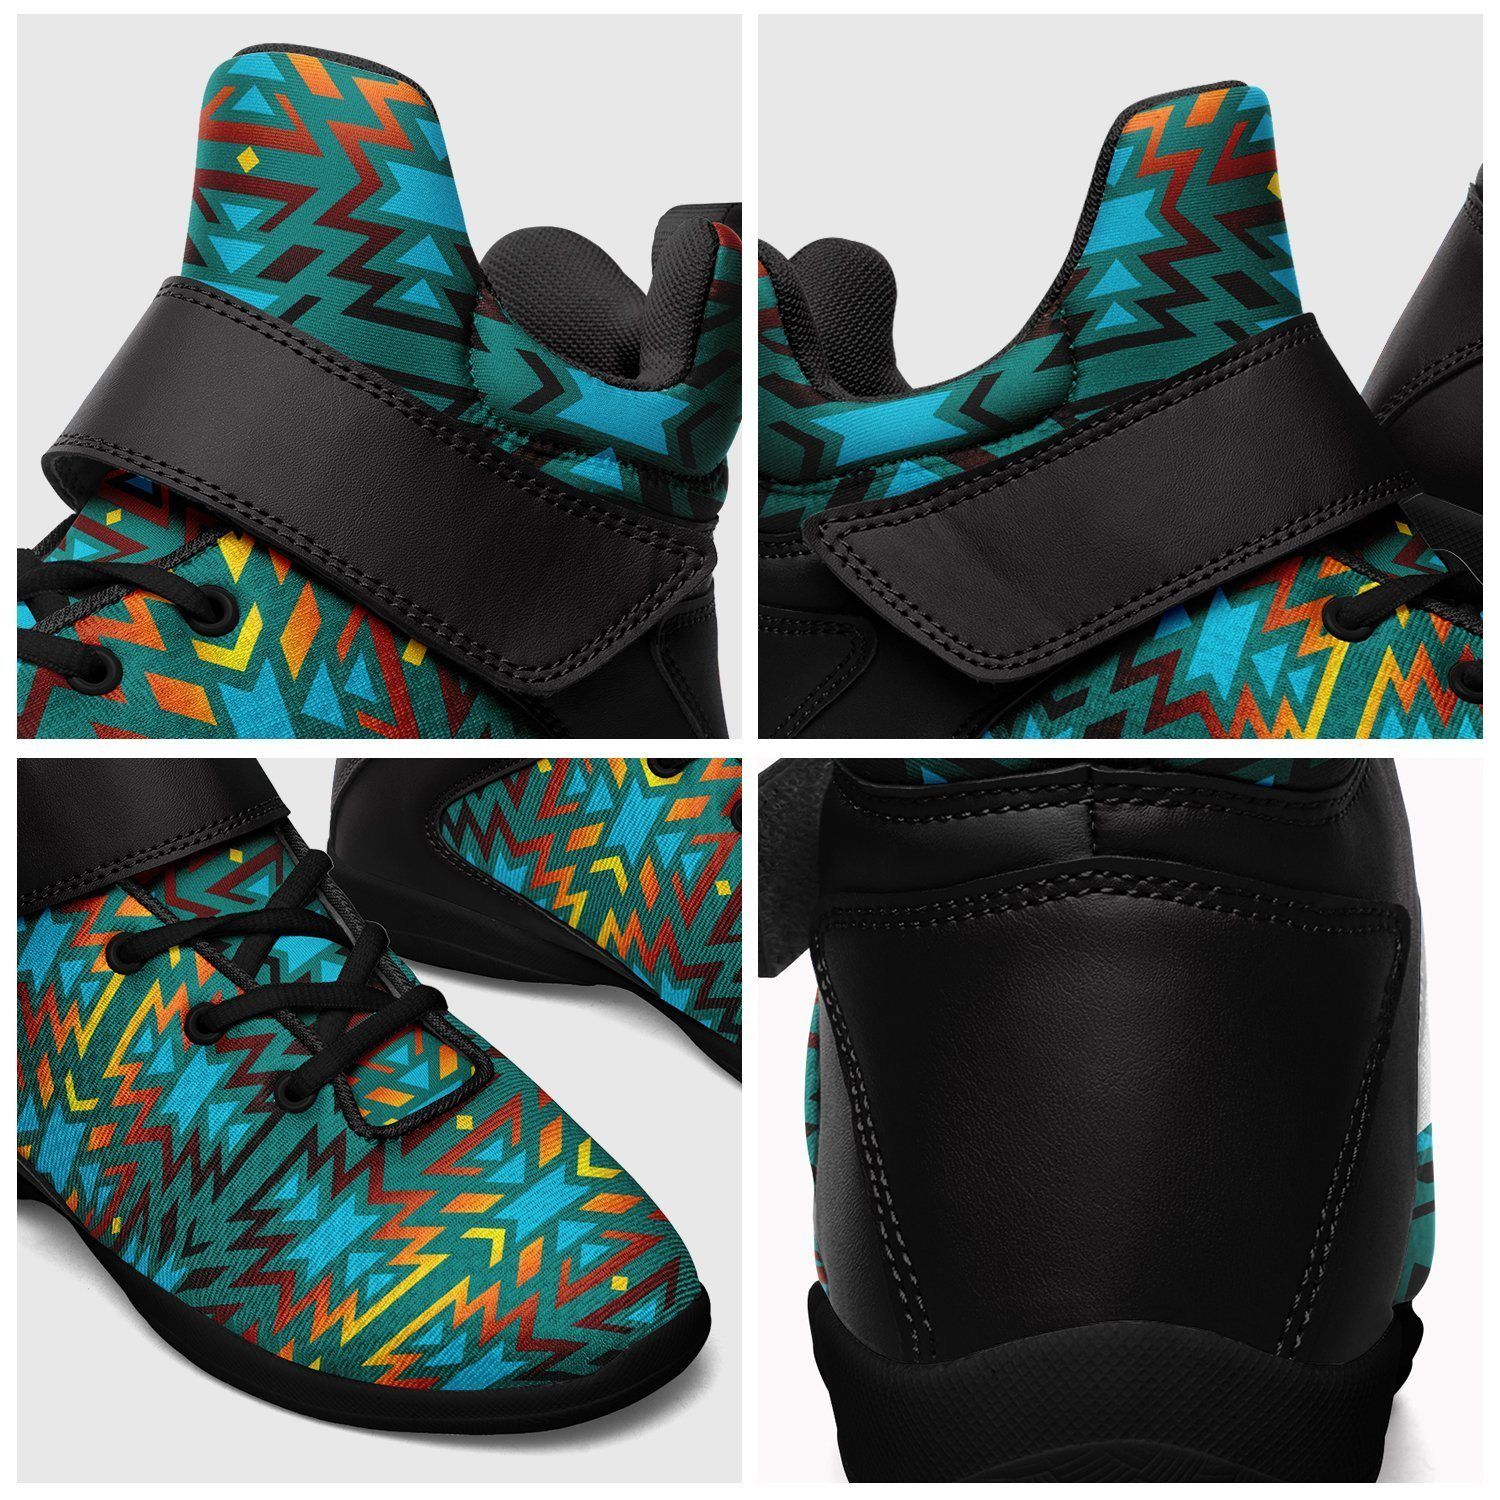 Fire Colors and Turquoise Teal Ipottaa Basketball / Sport High Top Shoes - Black Sole 49 Dzine 